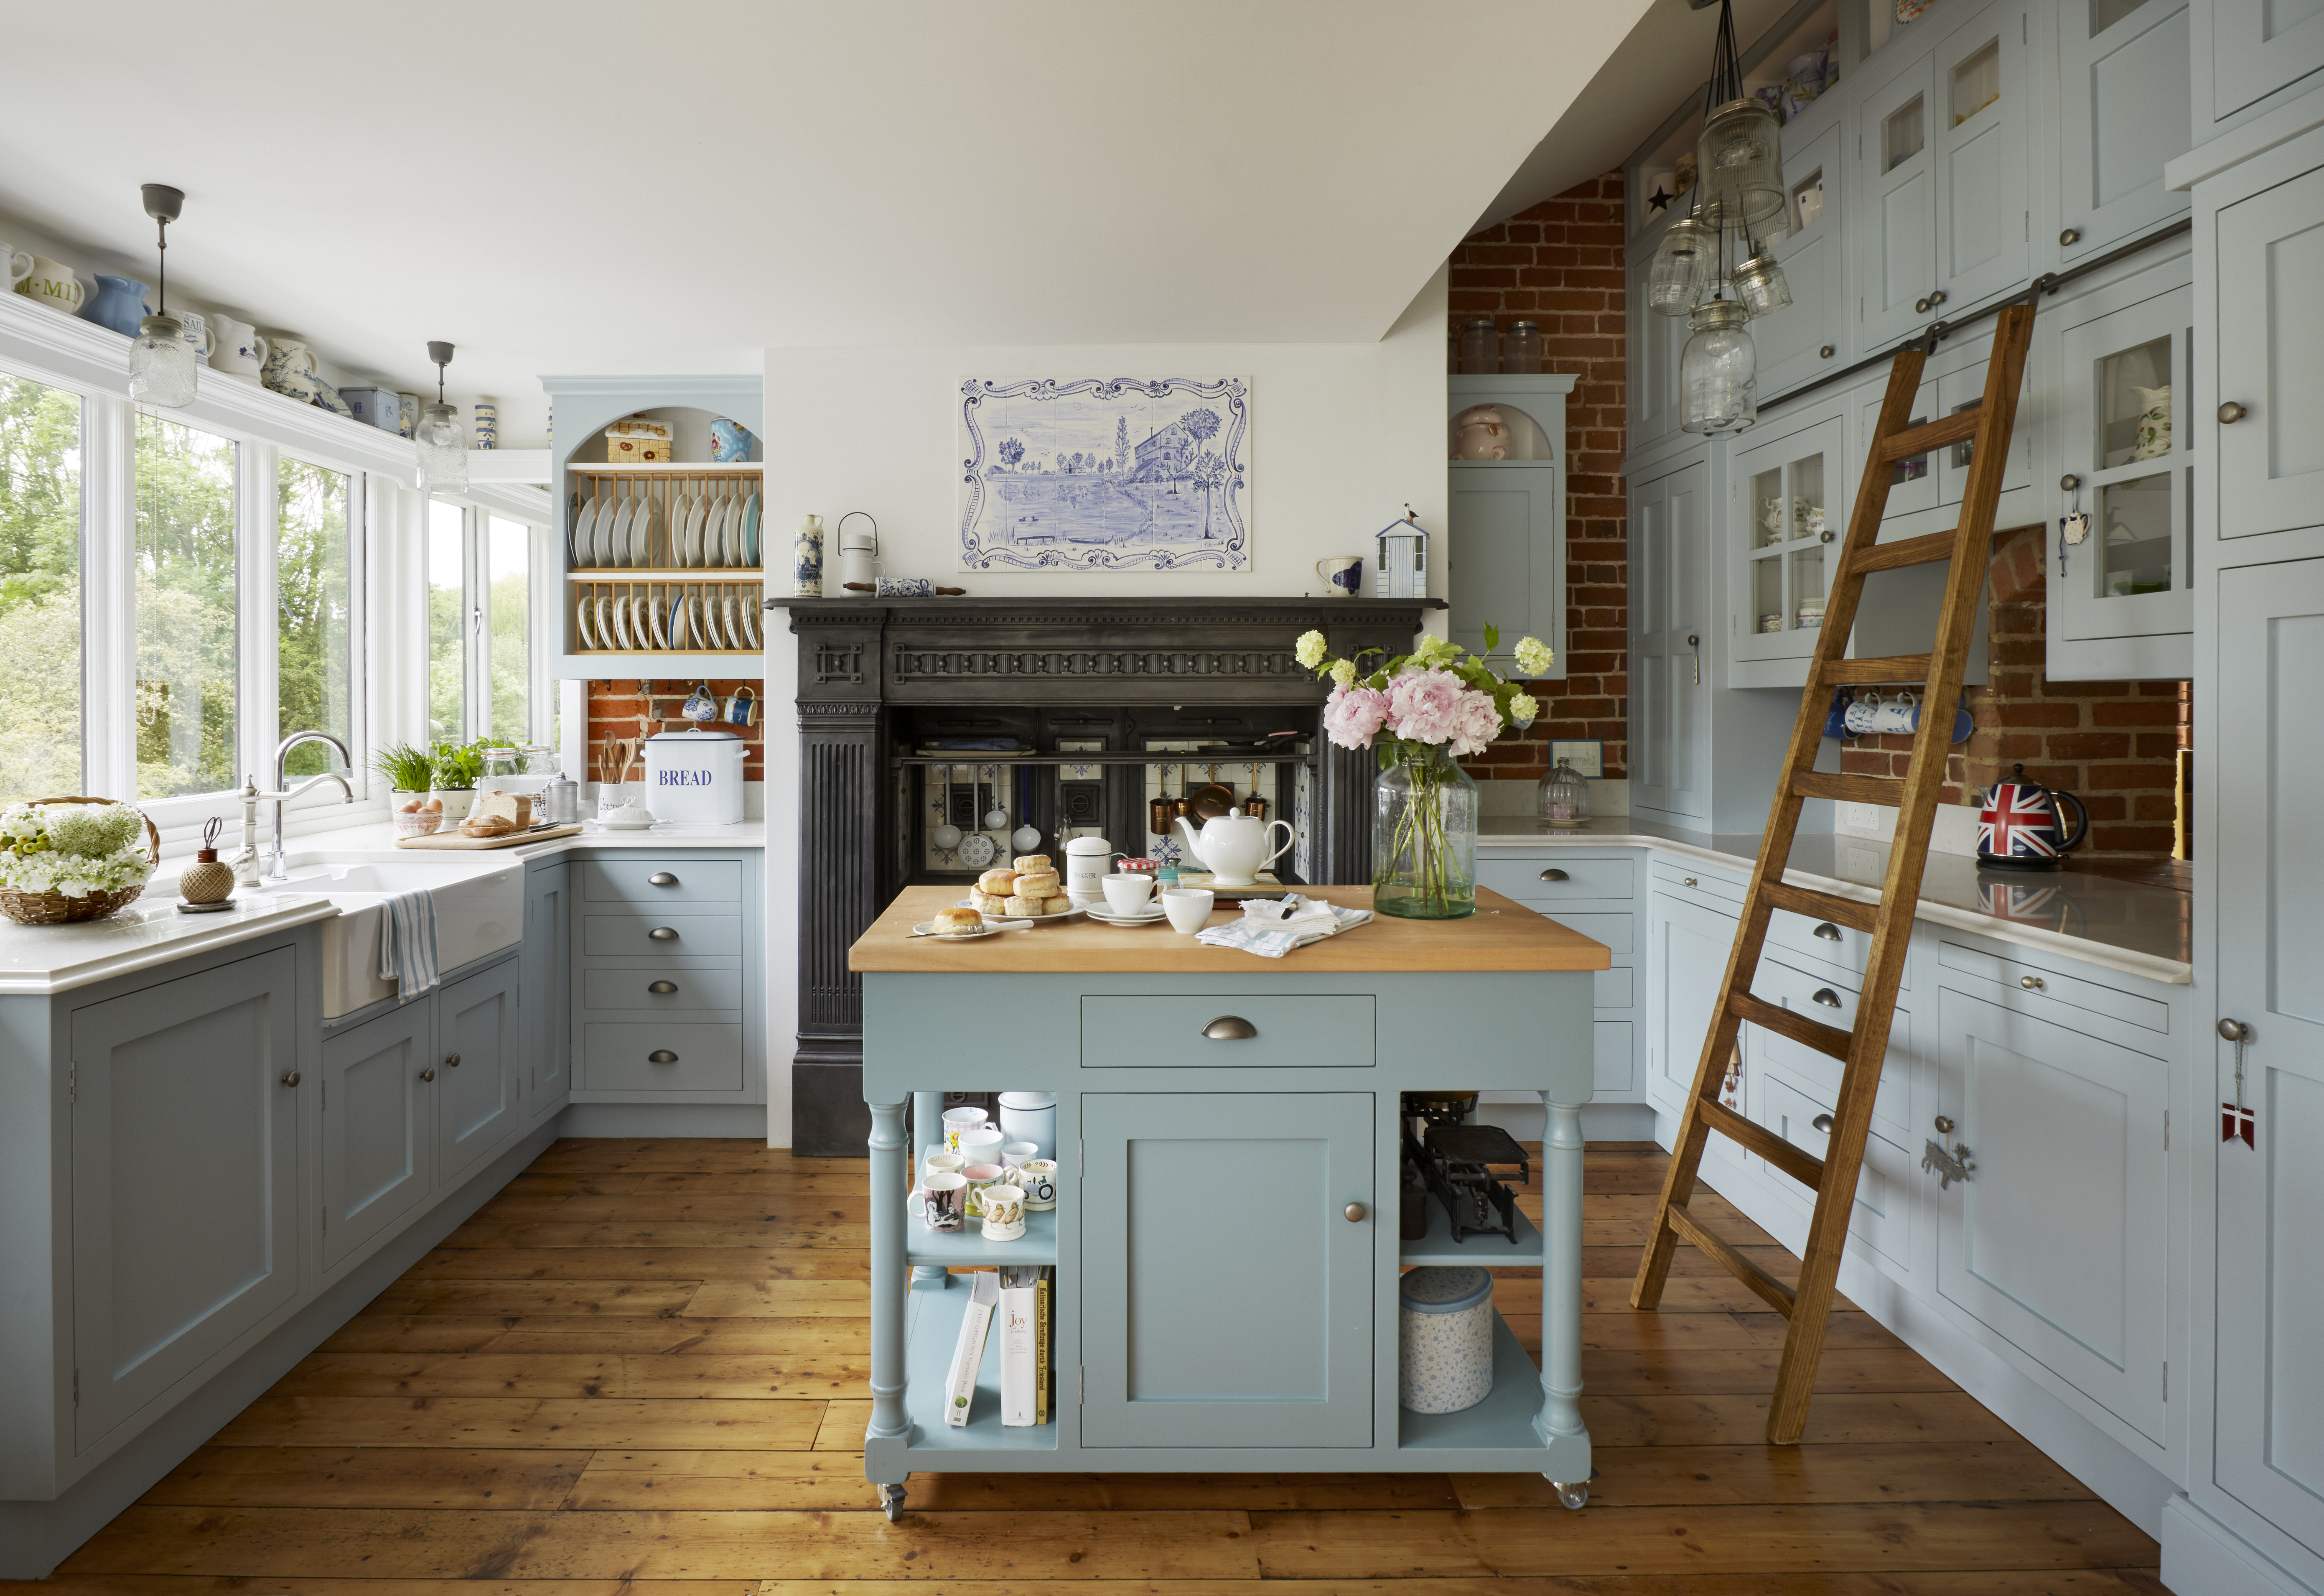 Designing a farmhouse kitchen 18 ideas that are brimming with ...